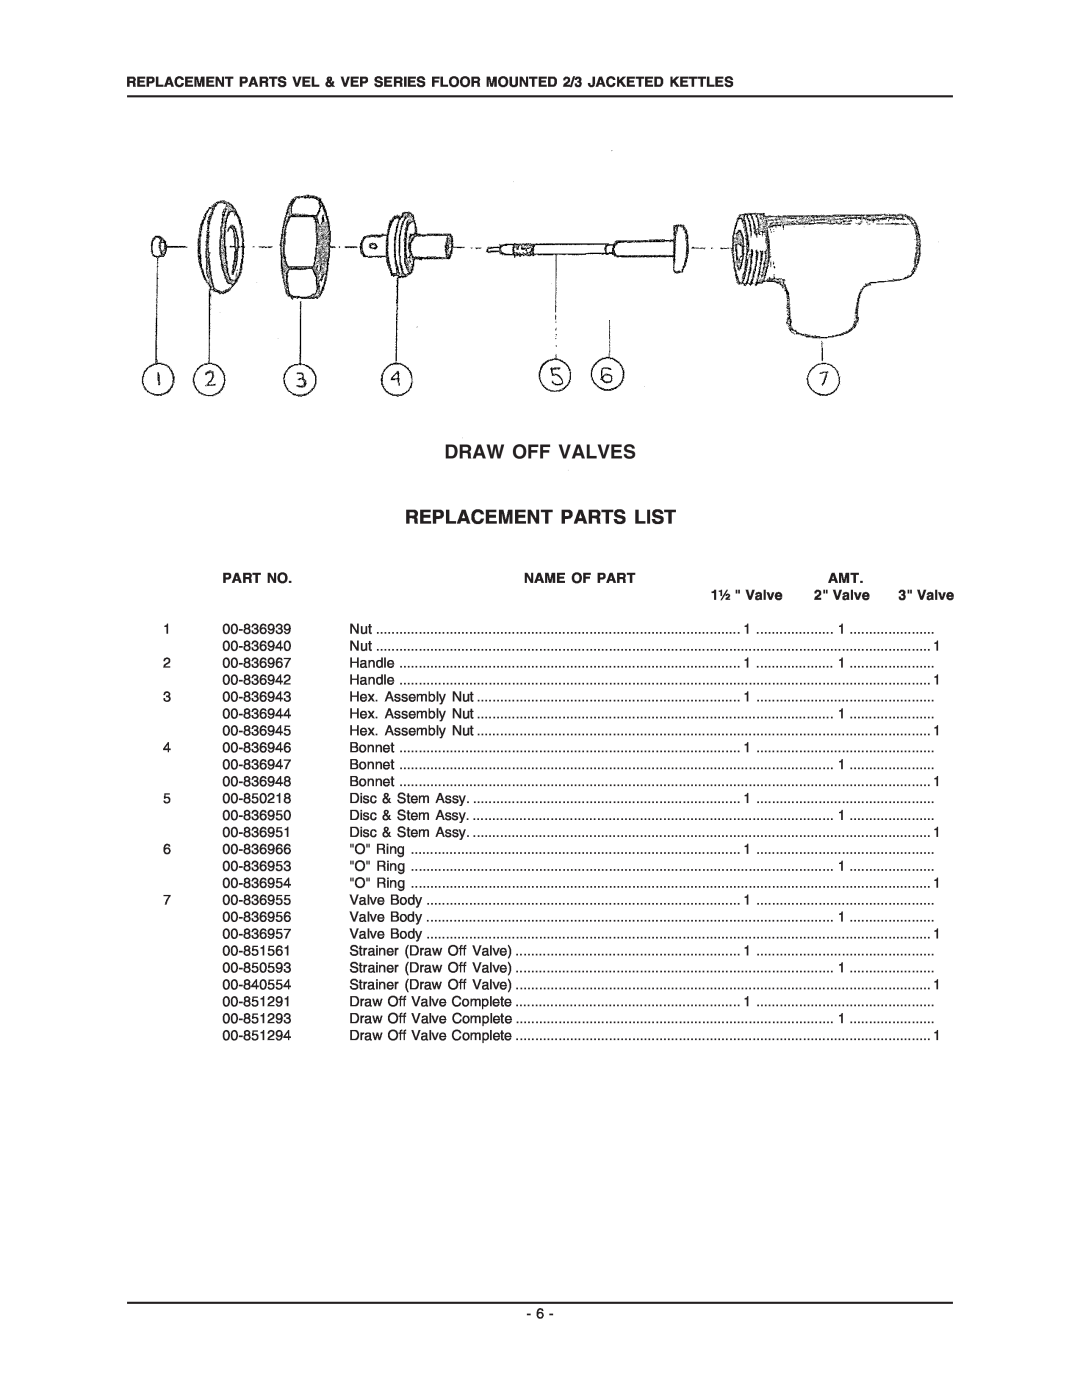 Vulcan-Hart VEL30, VEP40, VEP30, VEP80, VEL60, VEL40, VEP100 Draw Off Valves Replacement Parts List, 1½ Valve, Name Of Part 